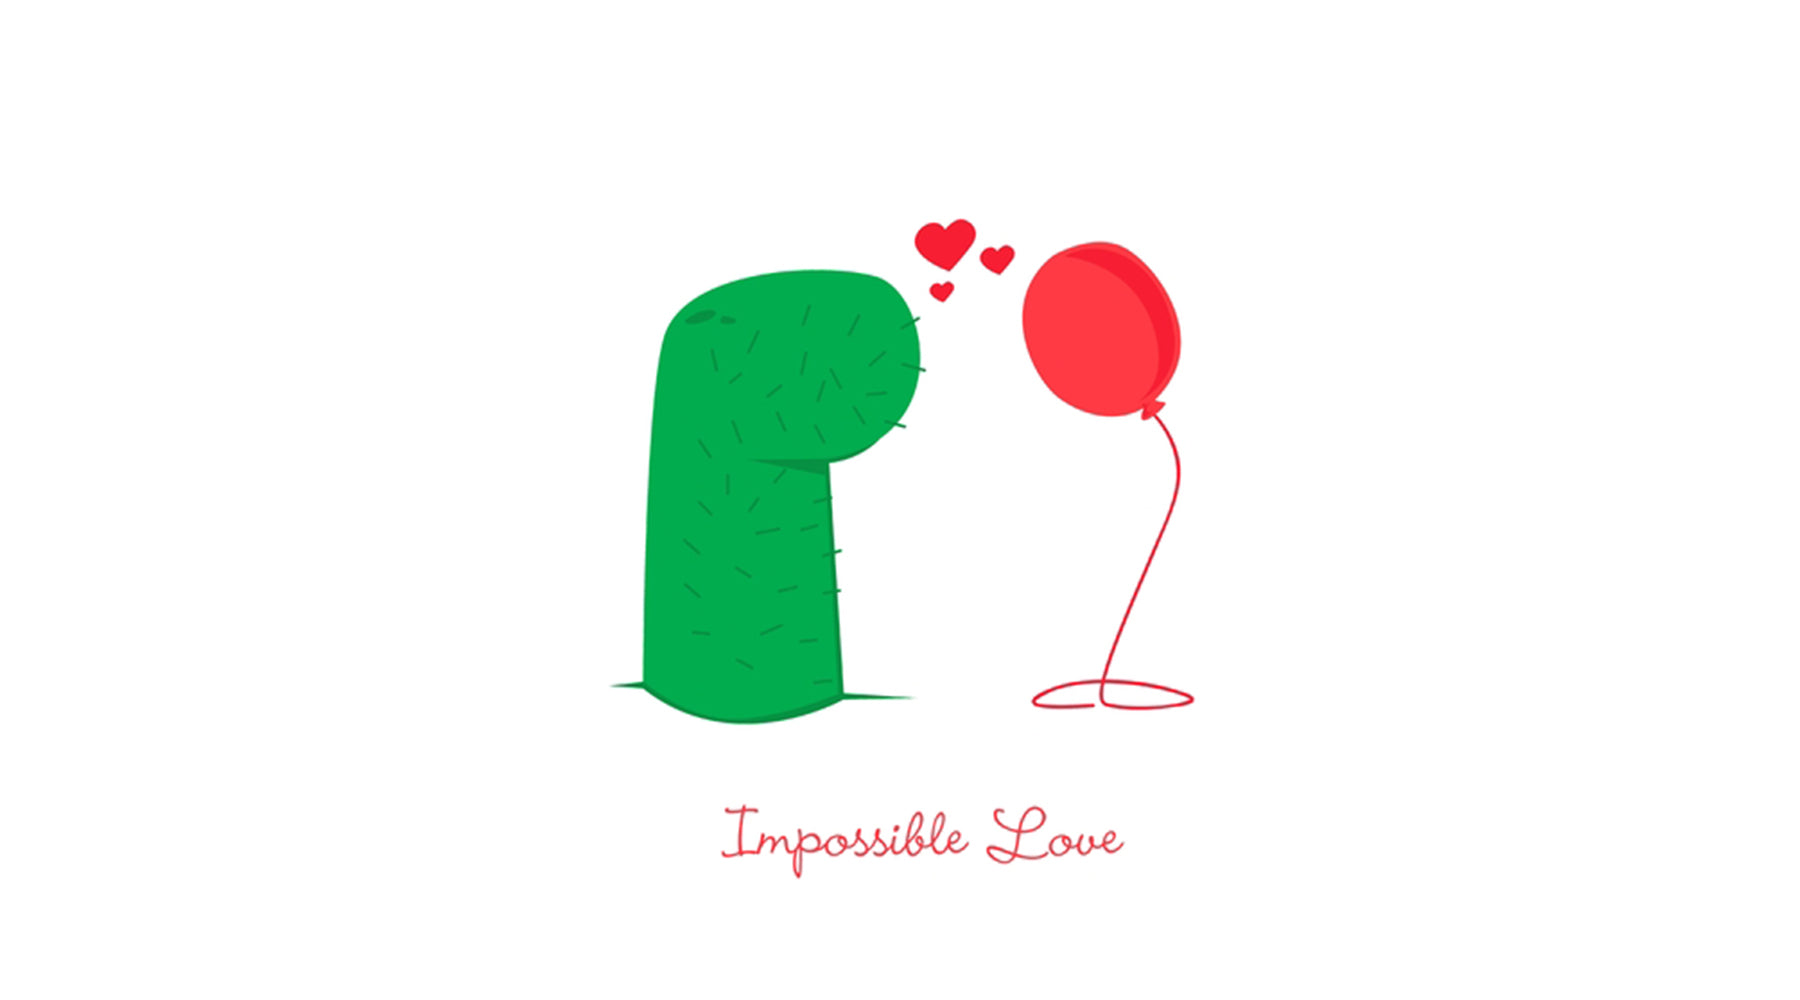 IMPOSSIBLE LOVE + WHAT TO DO WITH IT